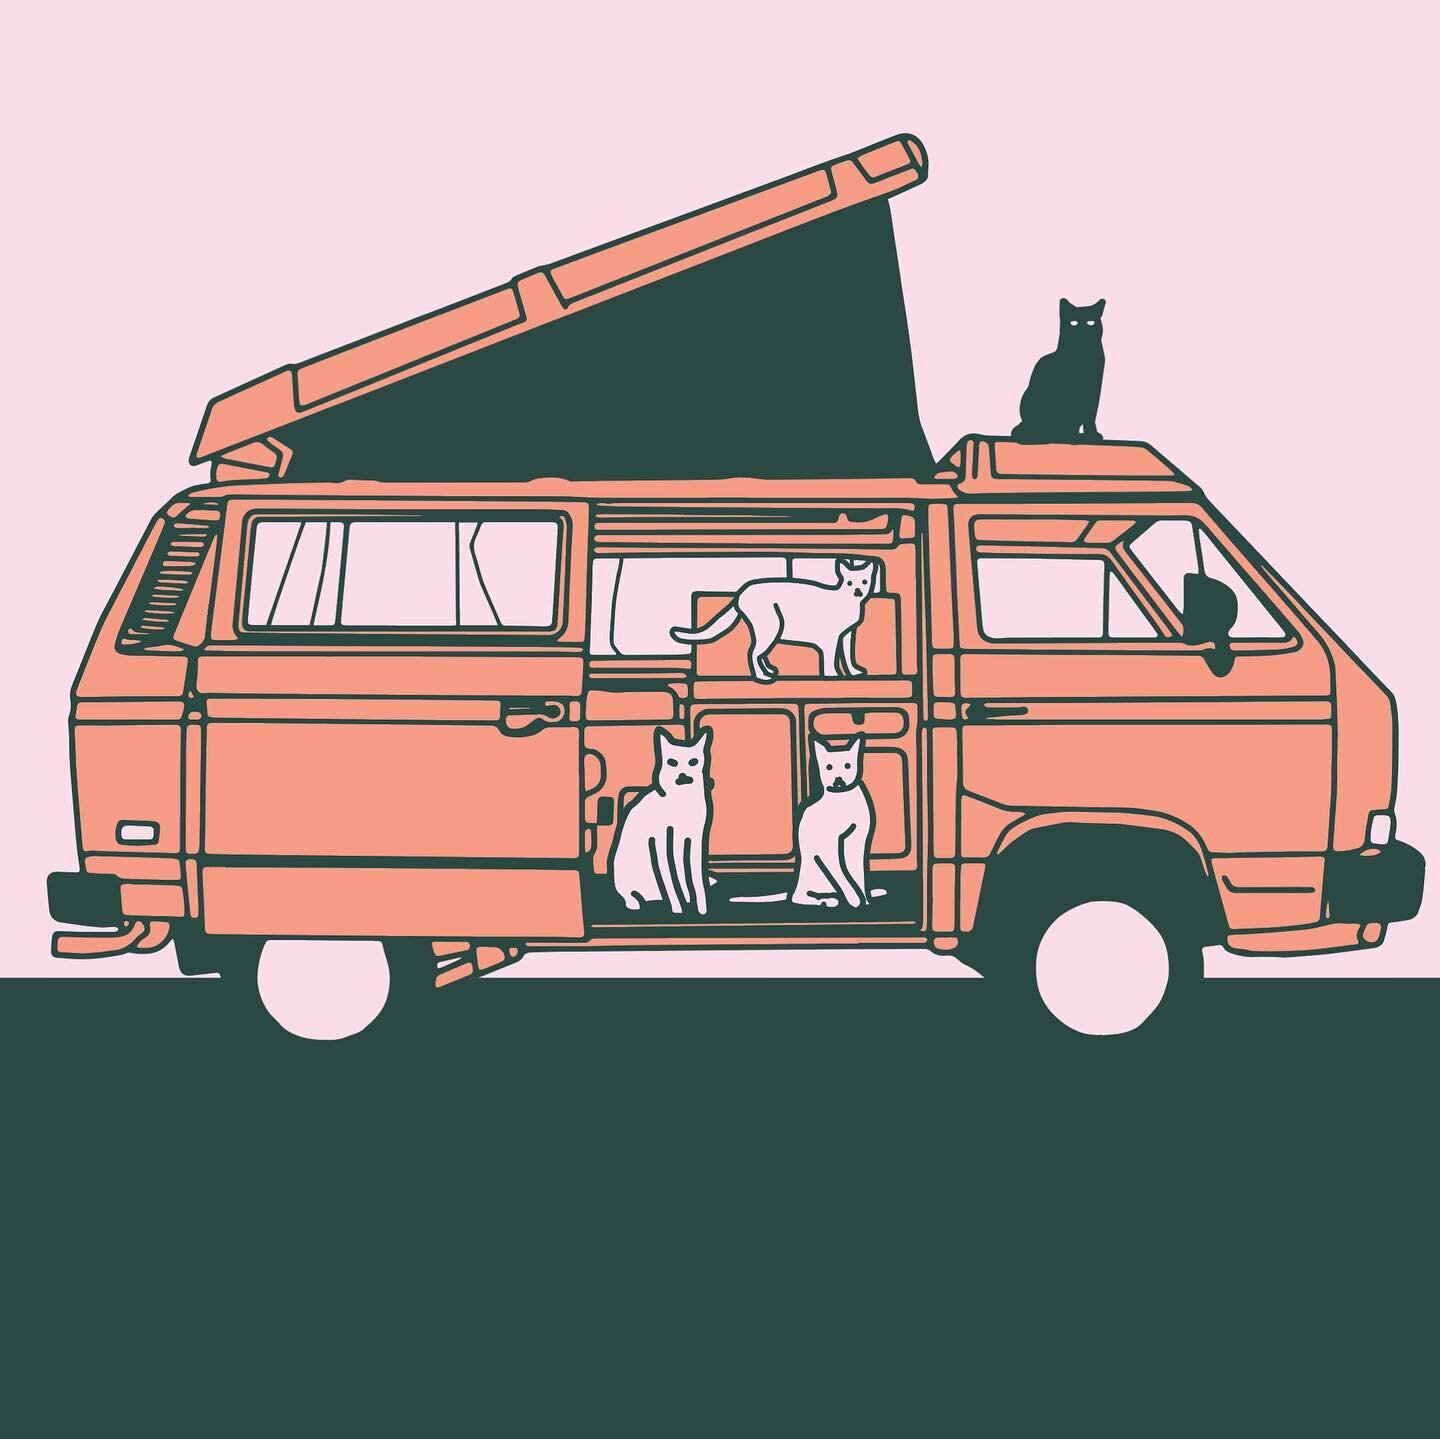 &ldquo;Camping &rdquo; is the Sixteenth drawing prompt for #doodleadayjuly from @ellolovey ✏️ and a motivational tool for #fasthandsdrawingclub ✏️ This is a dream scenario where I have a slightly cooler van, and cats that like to go camping together 